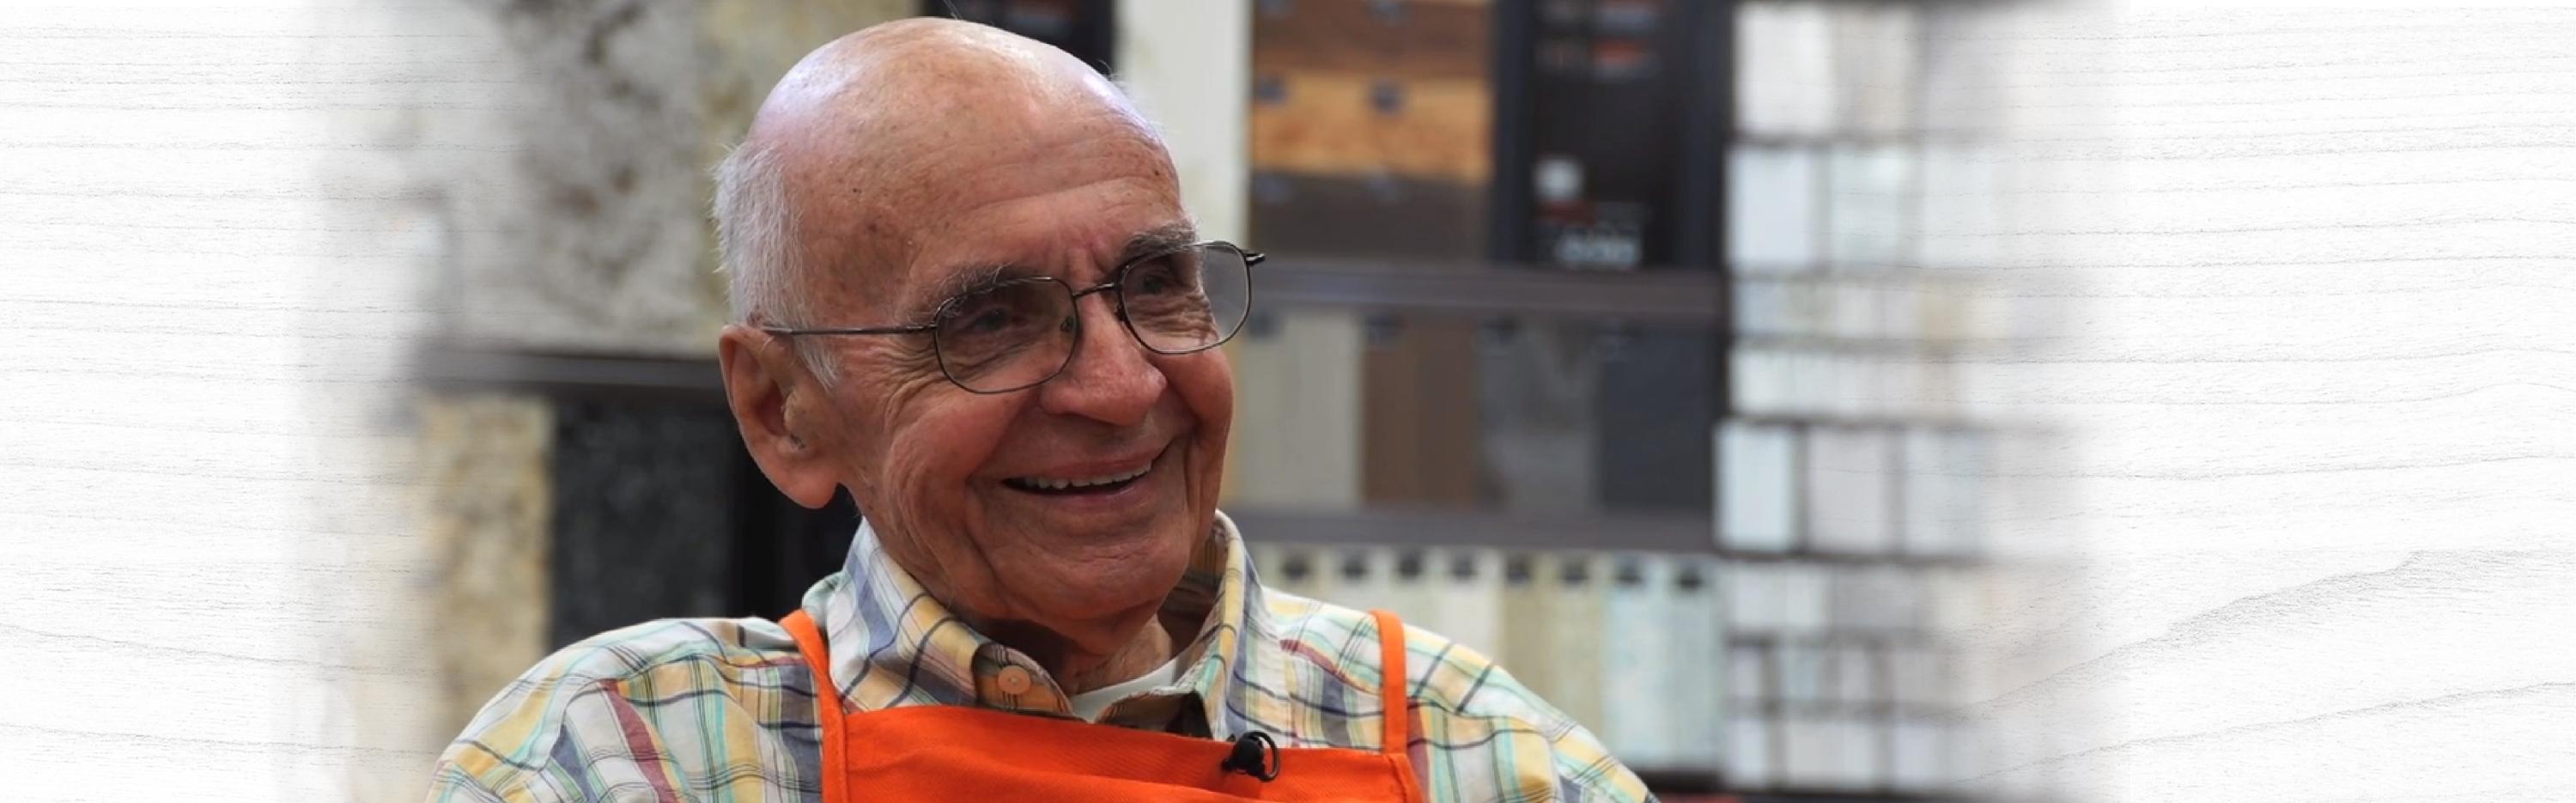 Home Depot's oldest employee, turning 91, tells CBC the secret to a long  life